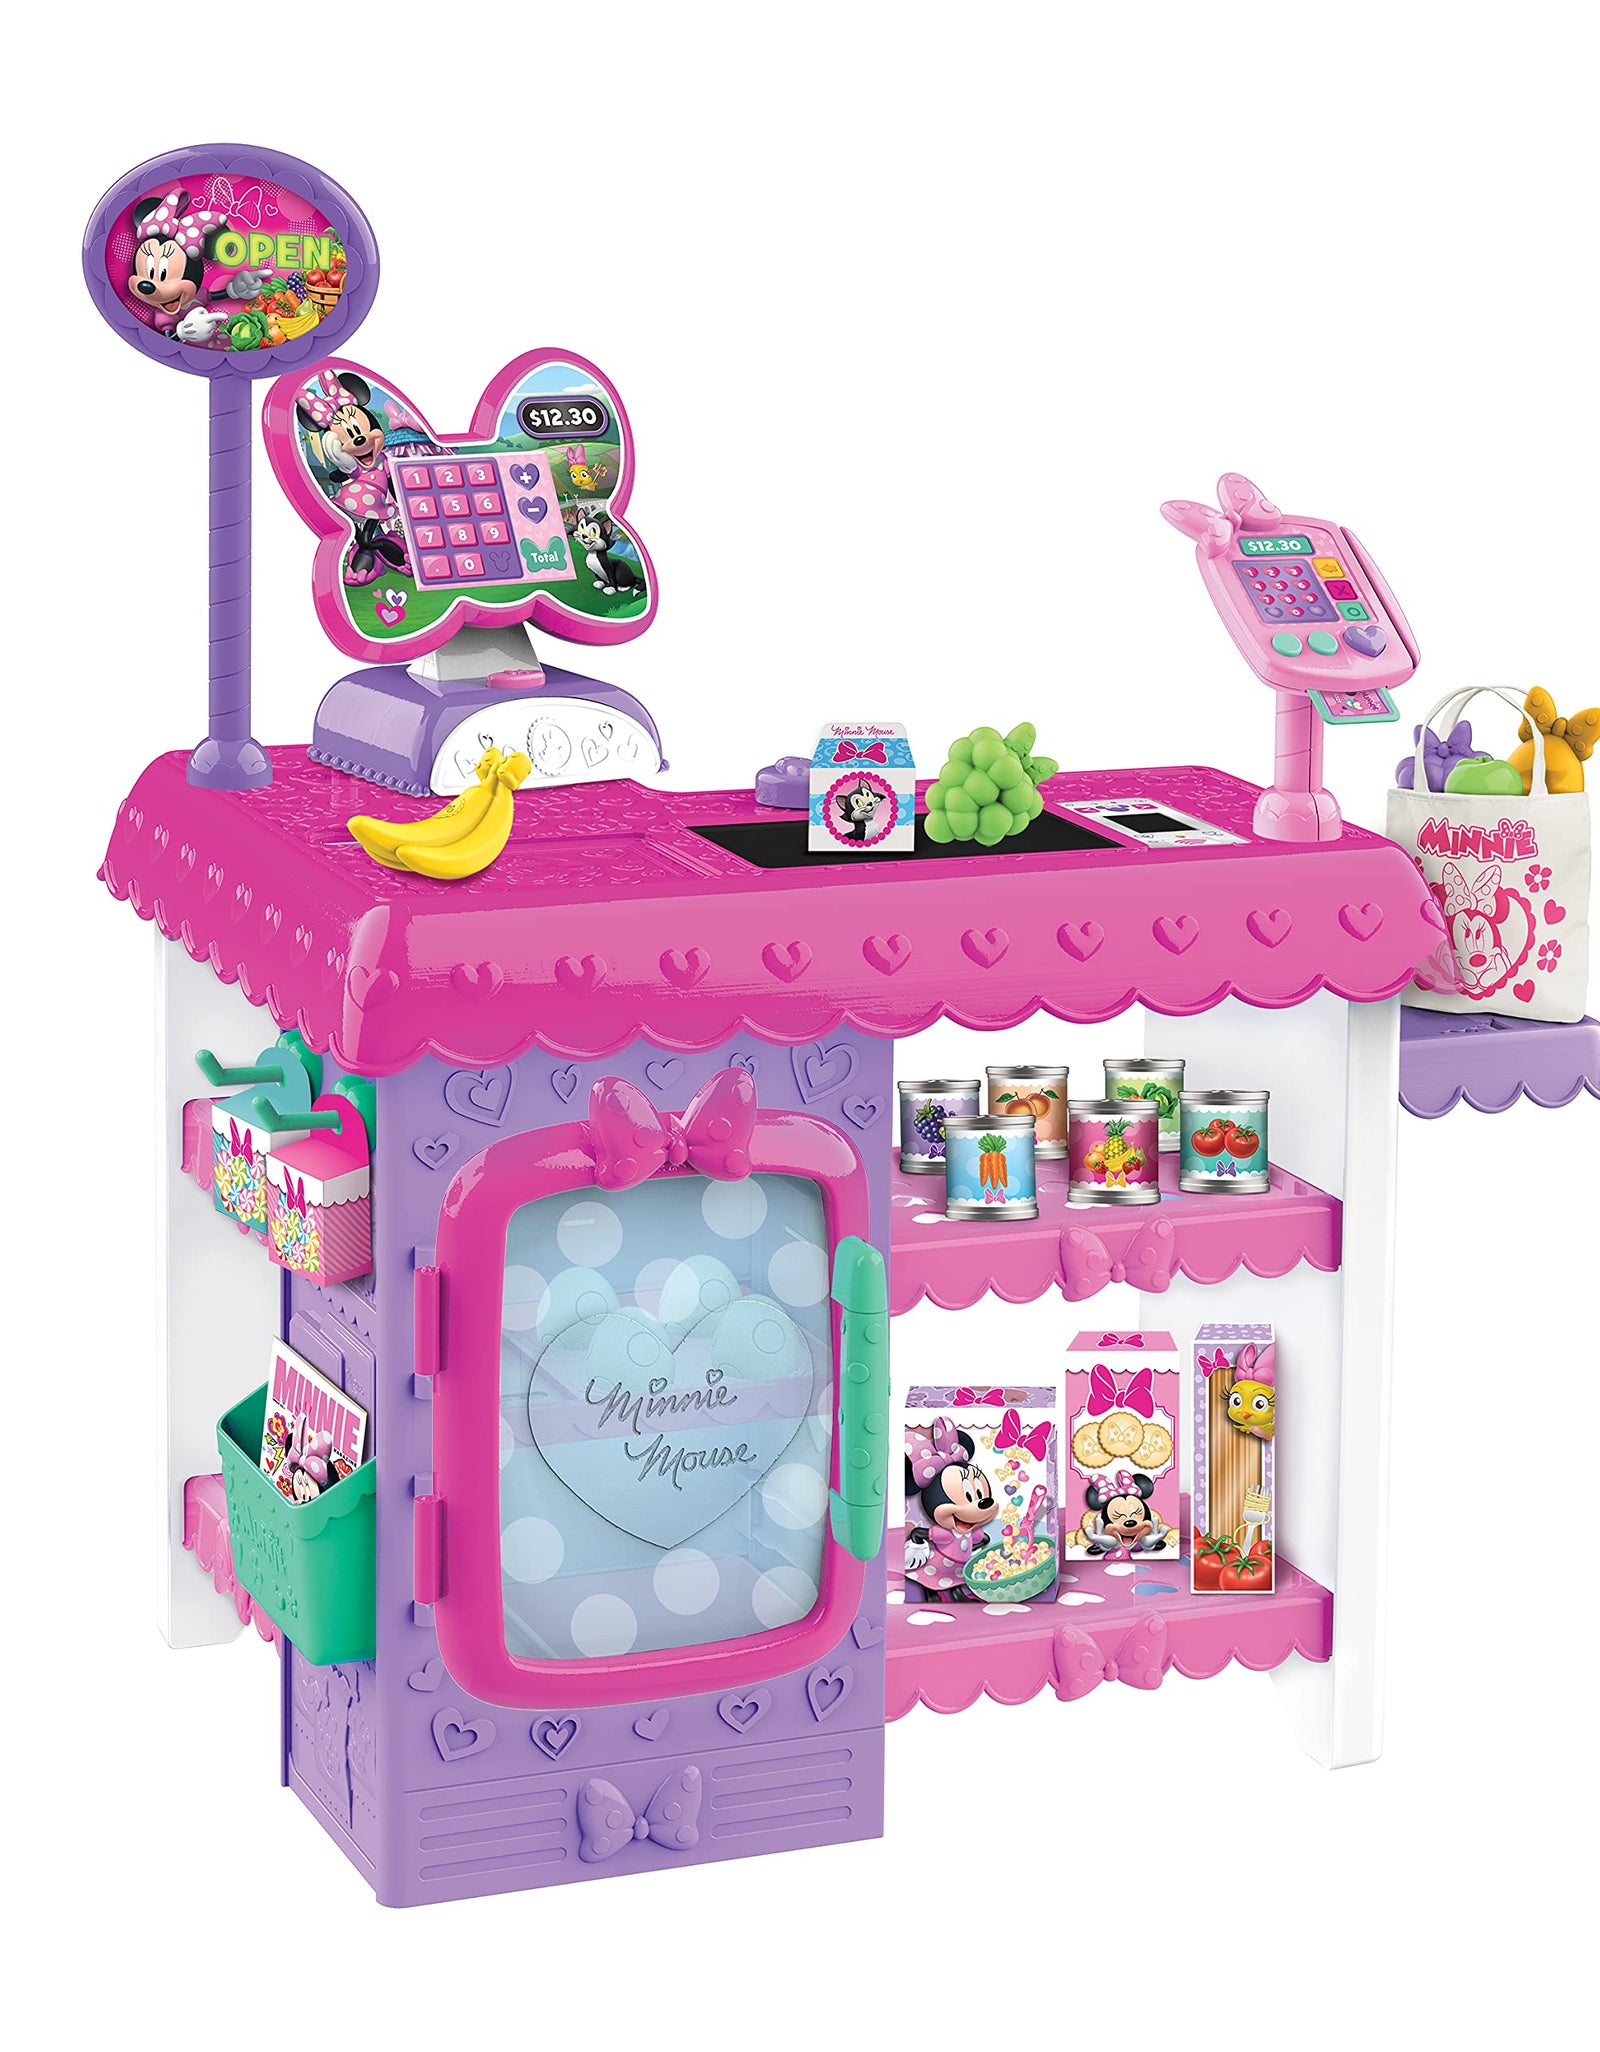 Minnie Mouse Disney Junior Marvelous Market, Pretend Play Cash Register with Realistic Sounds, 45 Play Food Pieces and Accessories, by Just Play